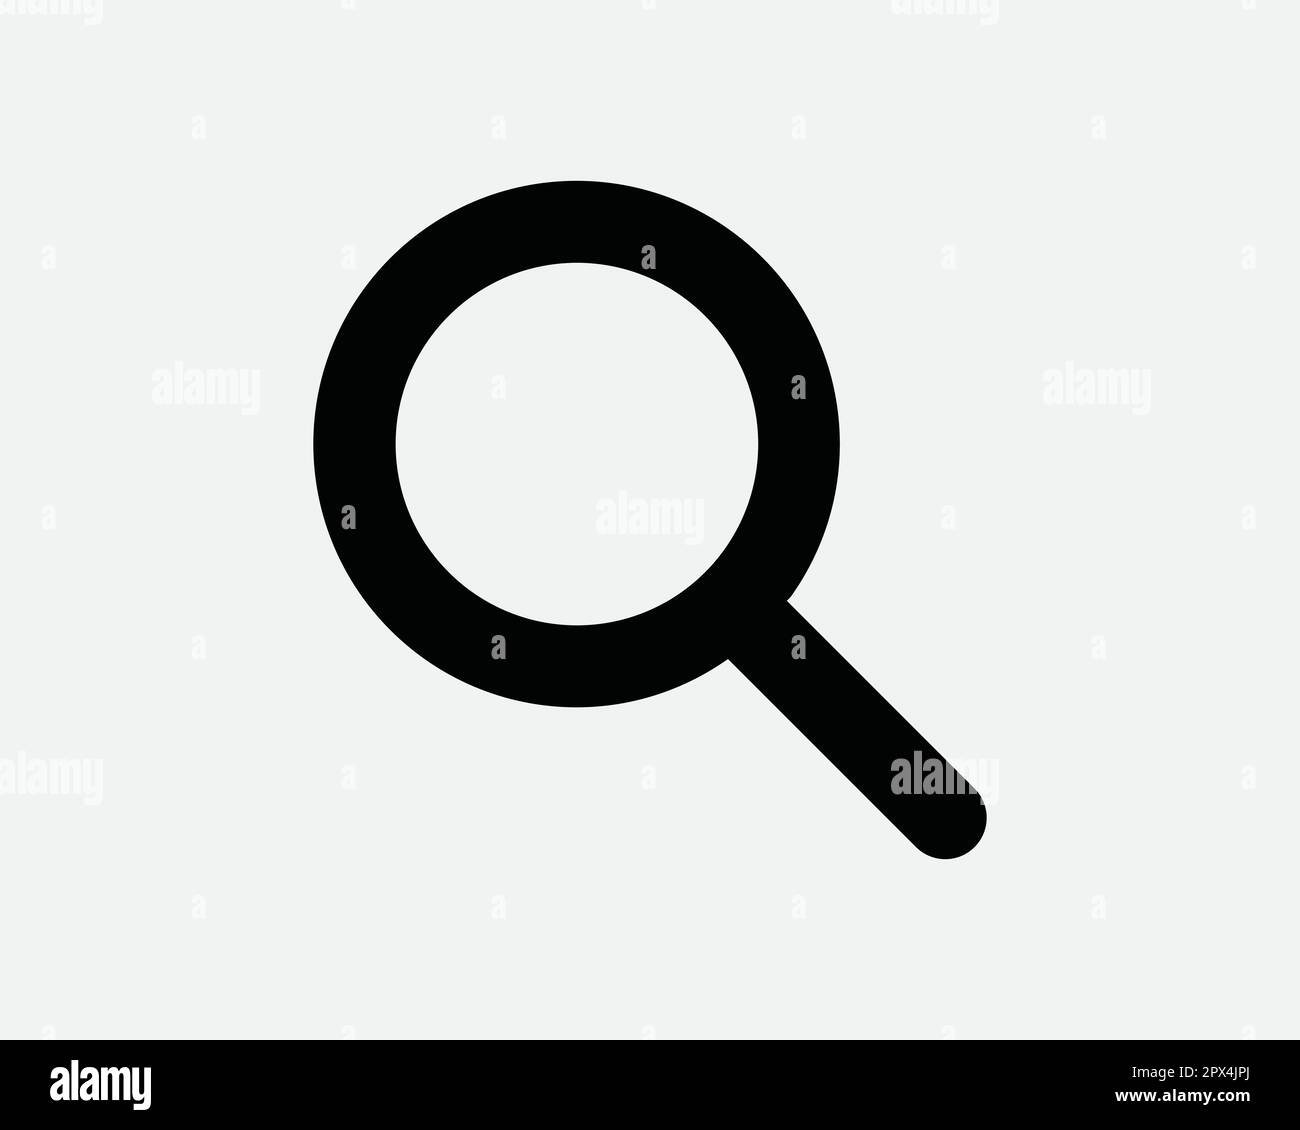 Magnifying Glass Icon. Magnifier Search Zoom Lens Research Discovery View Seek Enlarge Sign Symbol Artwork Graphic Illustration Clipart Vector Cricut Stock Vector